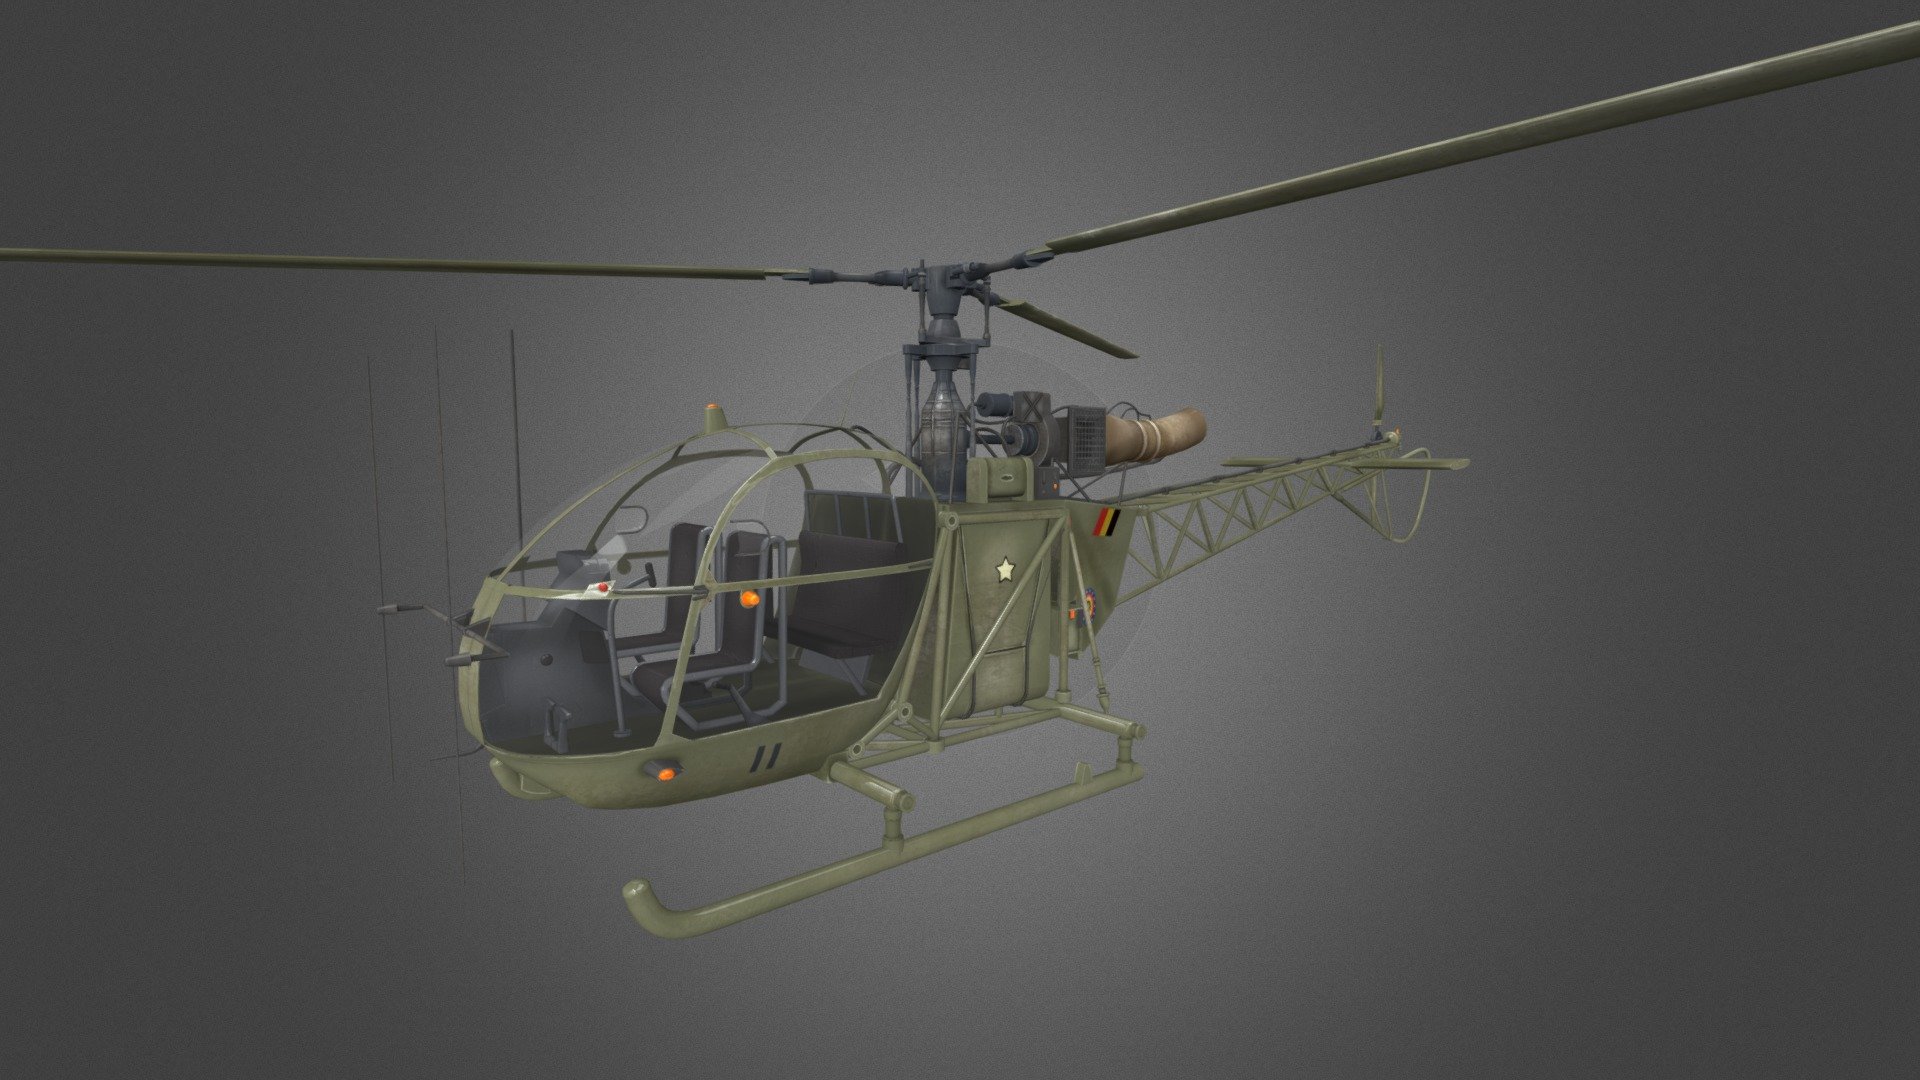 Low poly game-ready highquality and accurate 3d model of the Helicopter Aérospatiale (Sud Aviation) Alouette II

Download: http://gamedev.cgduck.pro - Helicopter Aérospatiale Sud Aviation Alouette II - 3D model by CG Duck (@cg_duck) 3d model